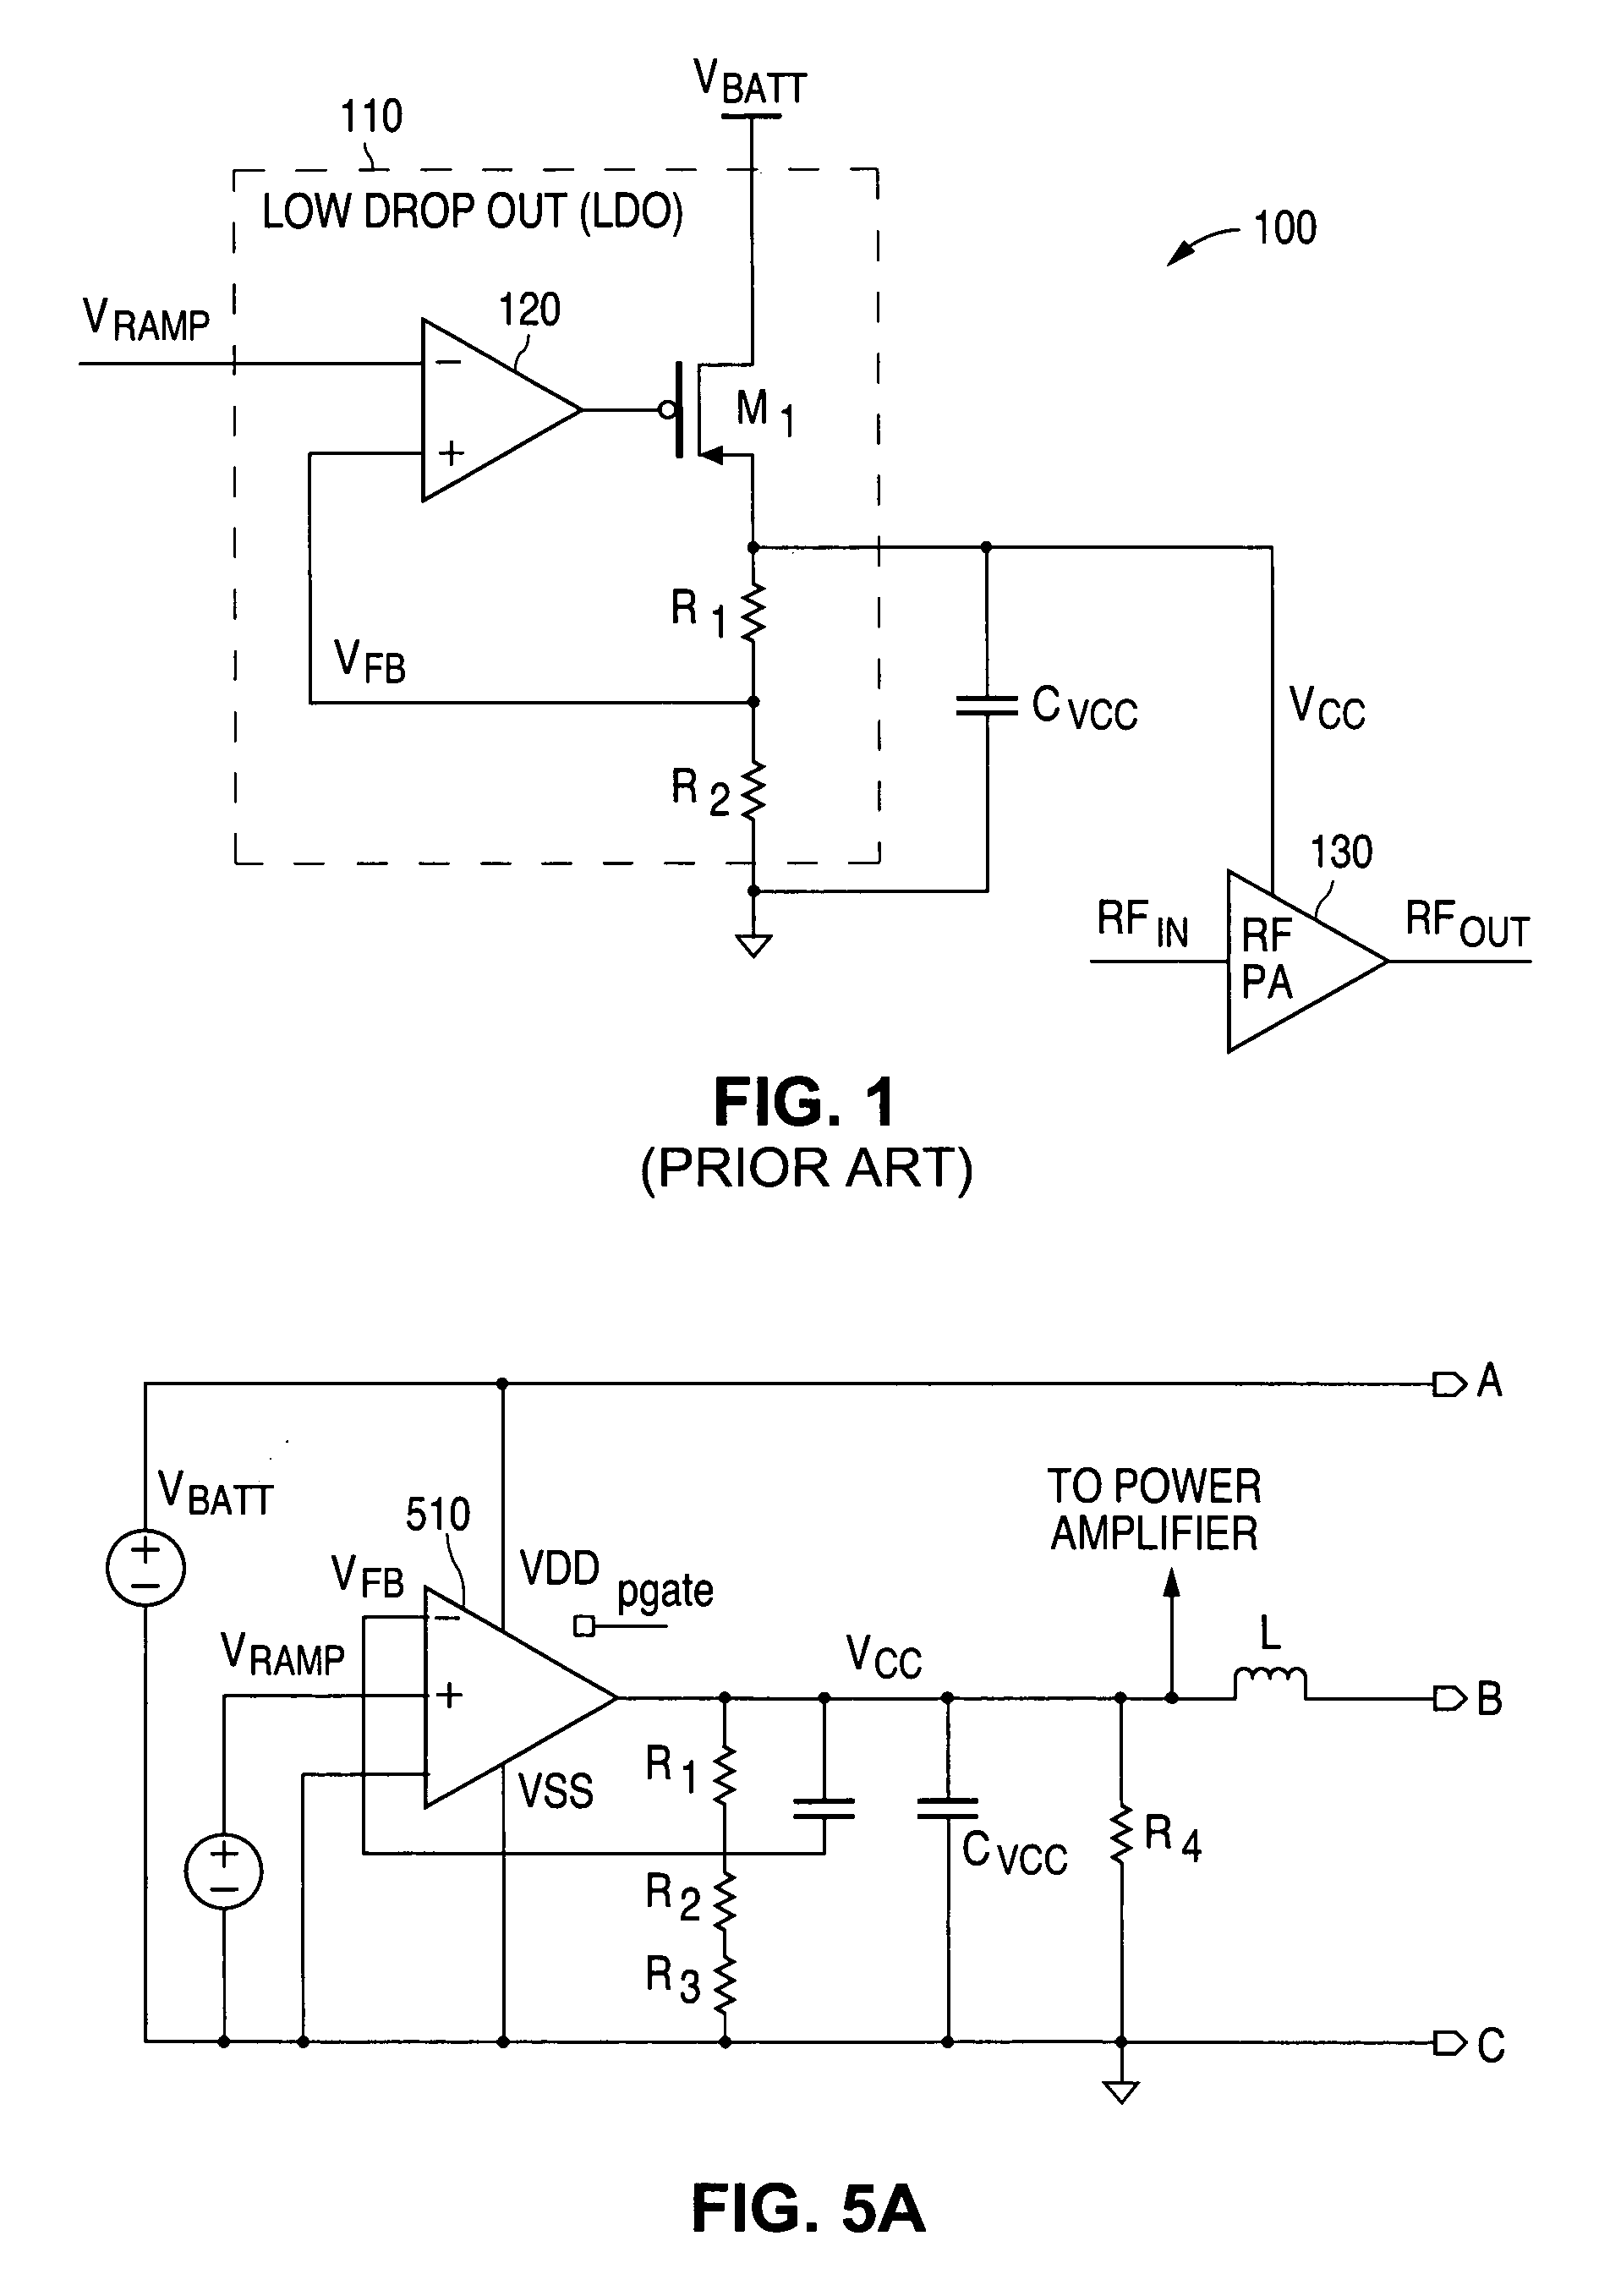 System and method for providing a highly efficient wide bandwidth power supply for a power amplifier